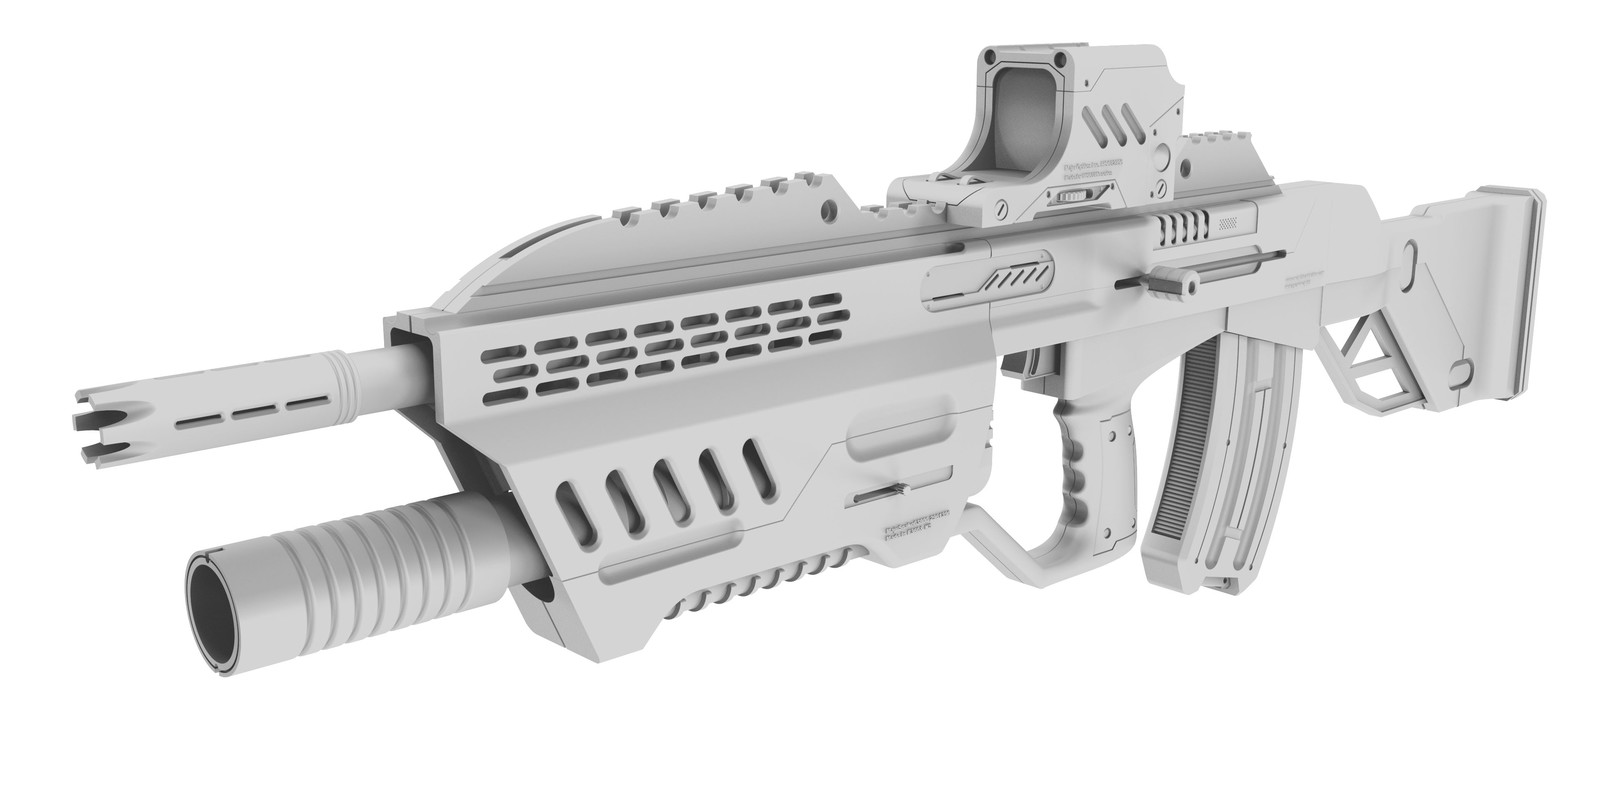 Scifi assult rifle with optic and grenade launcher- Clay